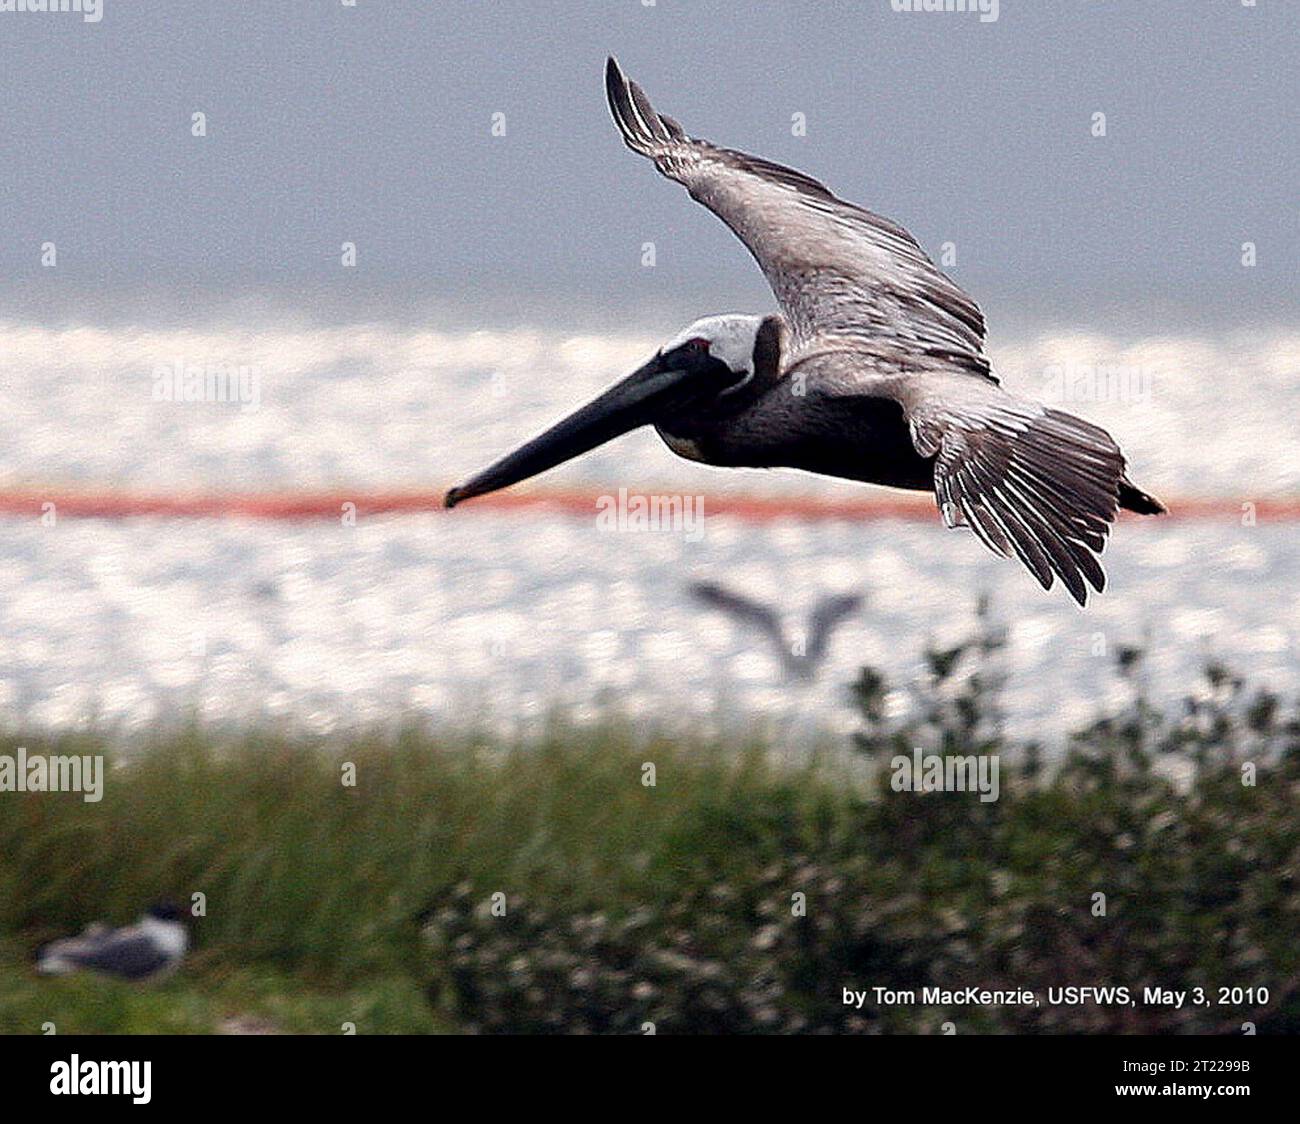 Brown pelican flying, with containment boom in background at Breton National Wildlife Refuge. Subjects: Birds; Deepwater Horizon Oil Spill; Shorebirds; Wildlife refuges. Location: Louisiana. Fish and Wildlife Service Site: BRETON NATIONAL WILDLIFE REFUGE. Stock Photo